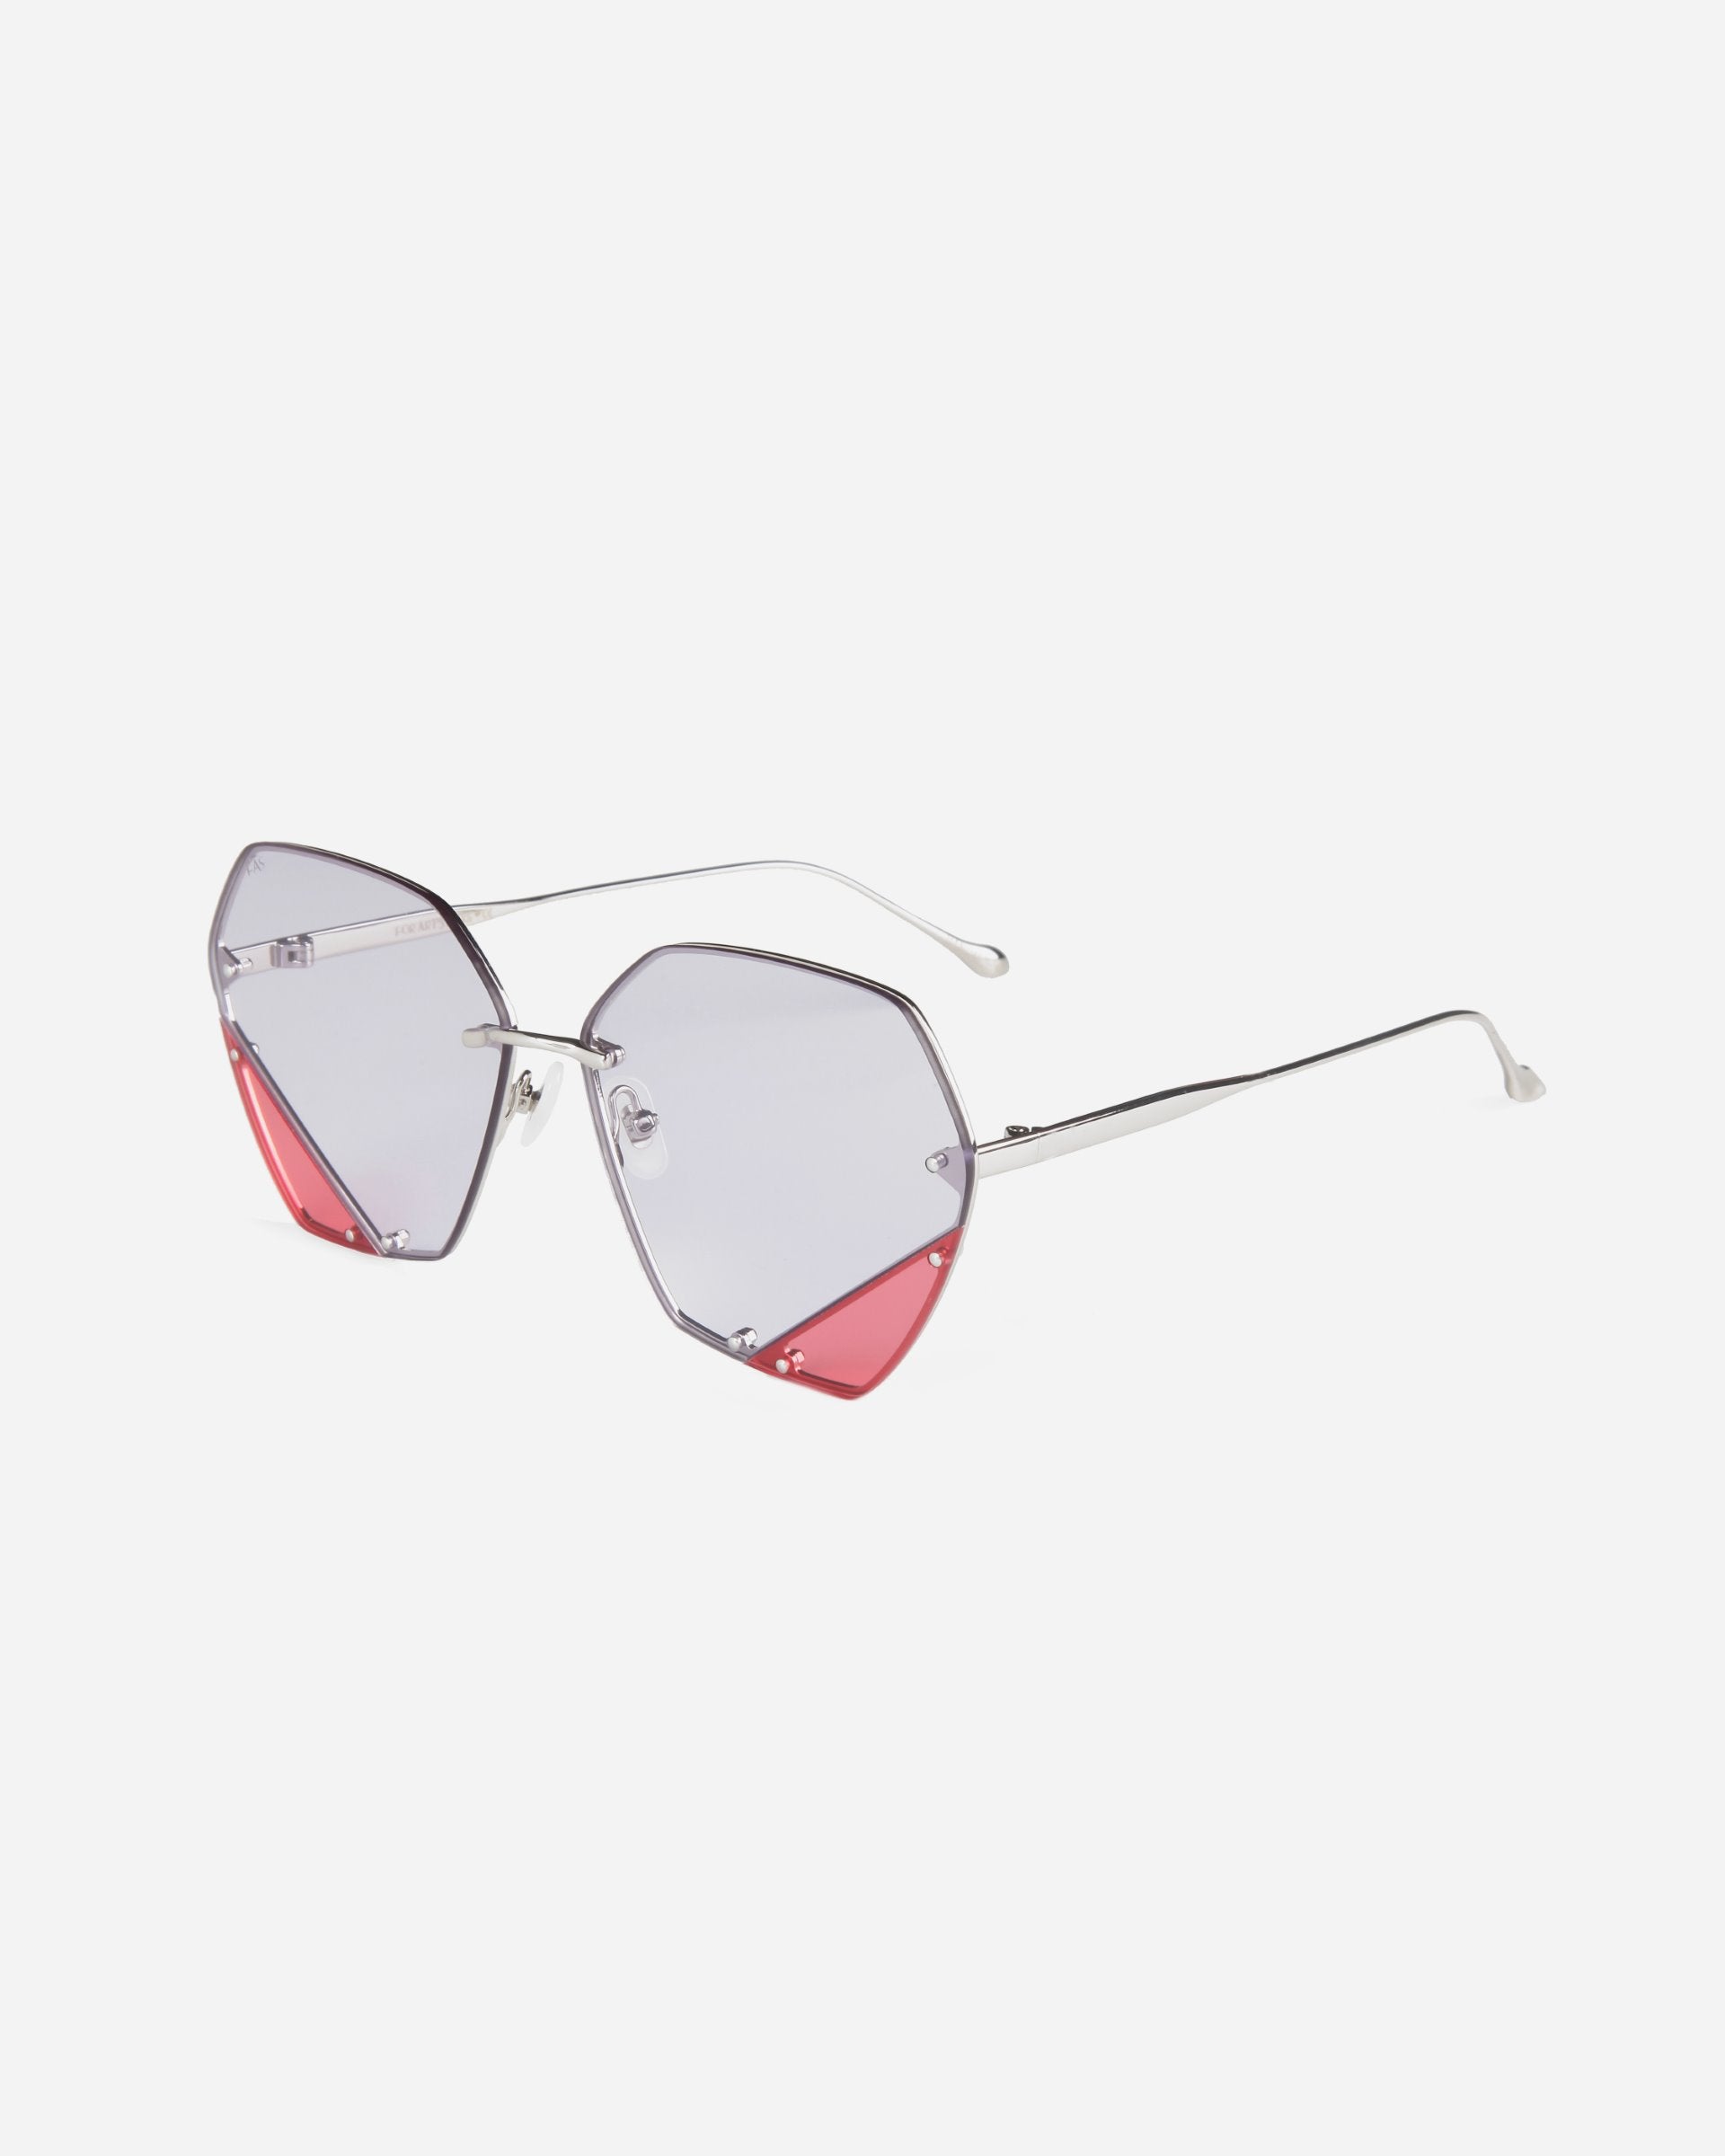 A pair of stylish, geometric For Art&#39;s Sake® Icy sunglasses with silver metal frames and gradient lenses, offering UV protection. The lenses are primarily blueish-gray with red tinting on the lower edges. The temples are thin and silver, extending to matching earpieces with jadestone nosepads. The background is white.